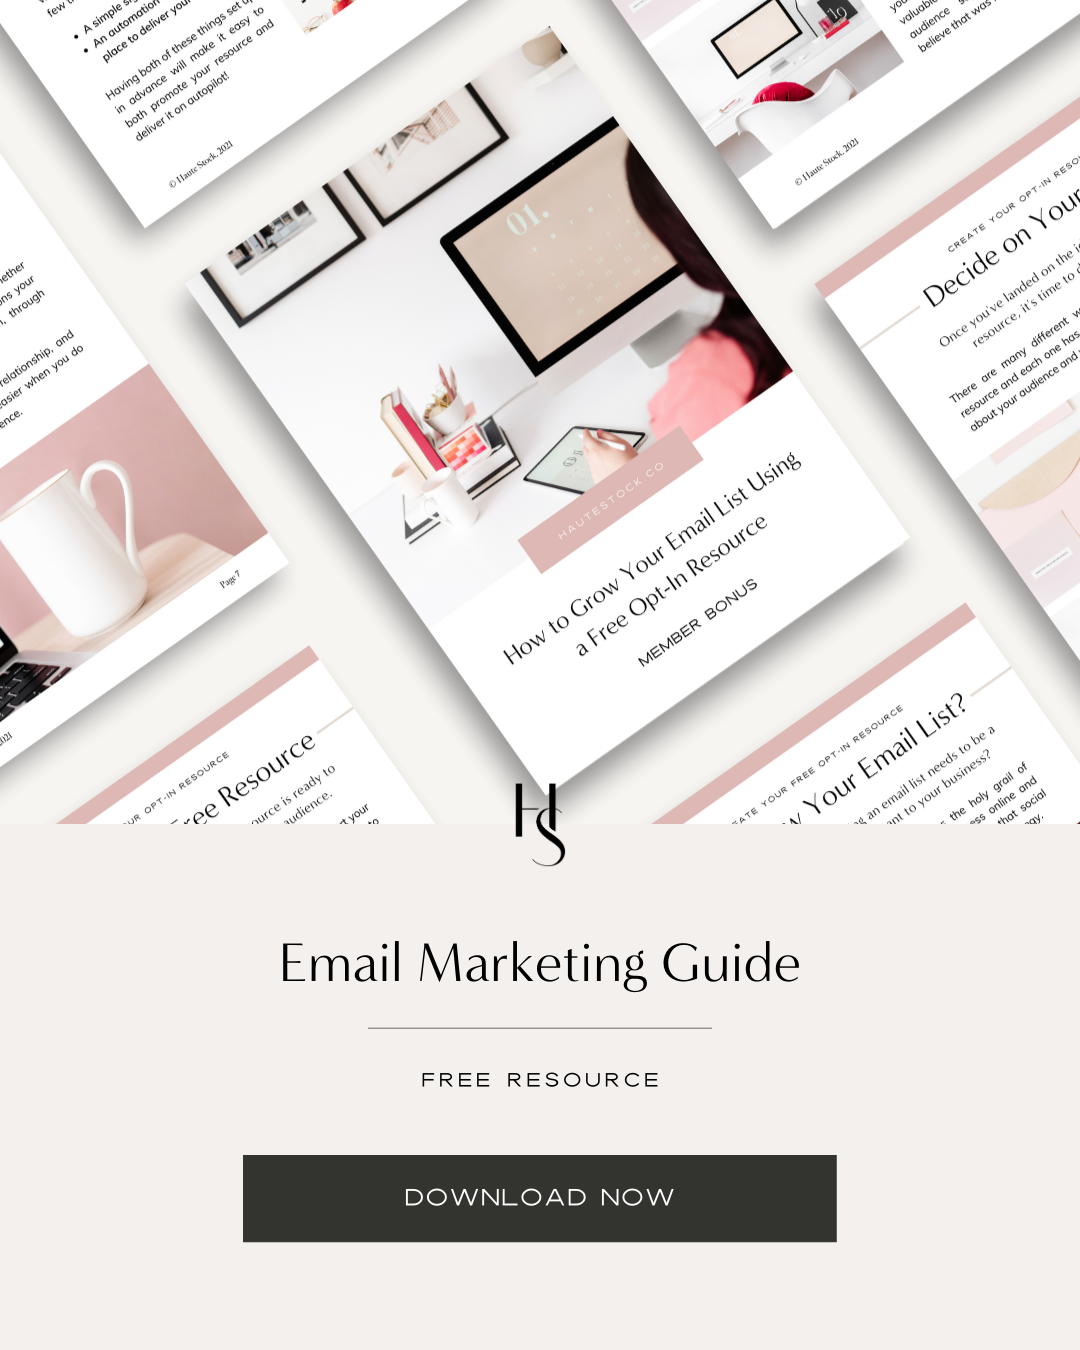 Free Email Marketing Guide from Haute Stock. Learn how to start and grow your email list by offering a free opt-in resource. Click to download the free guide now!